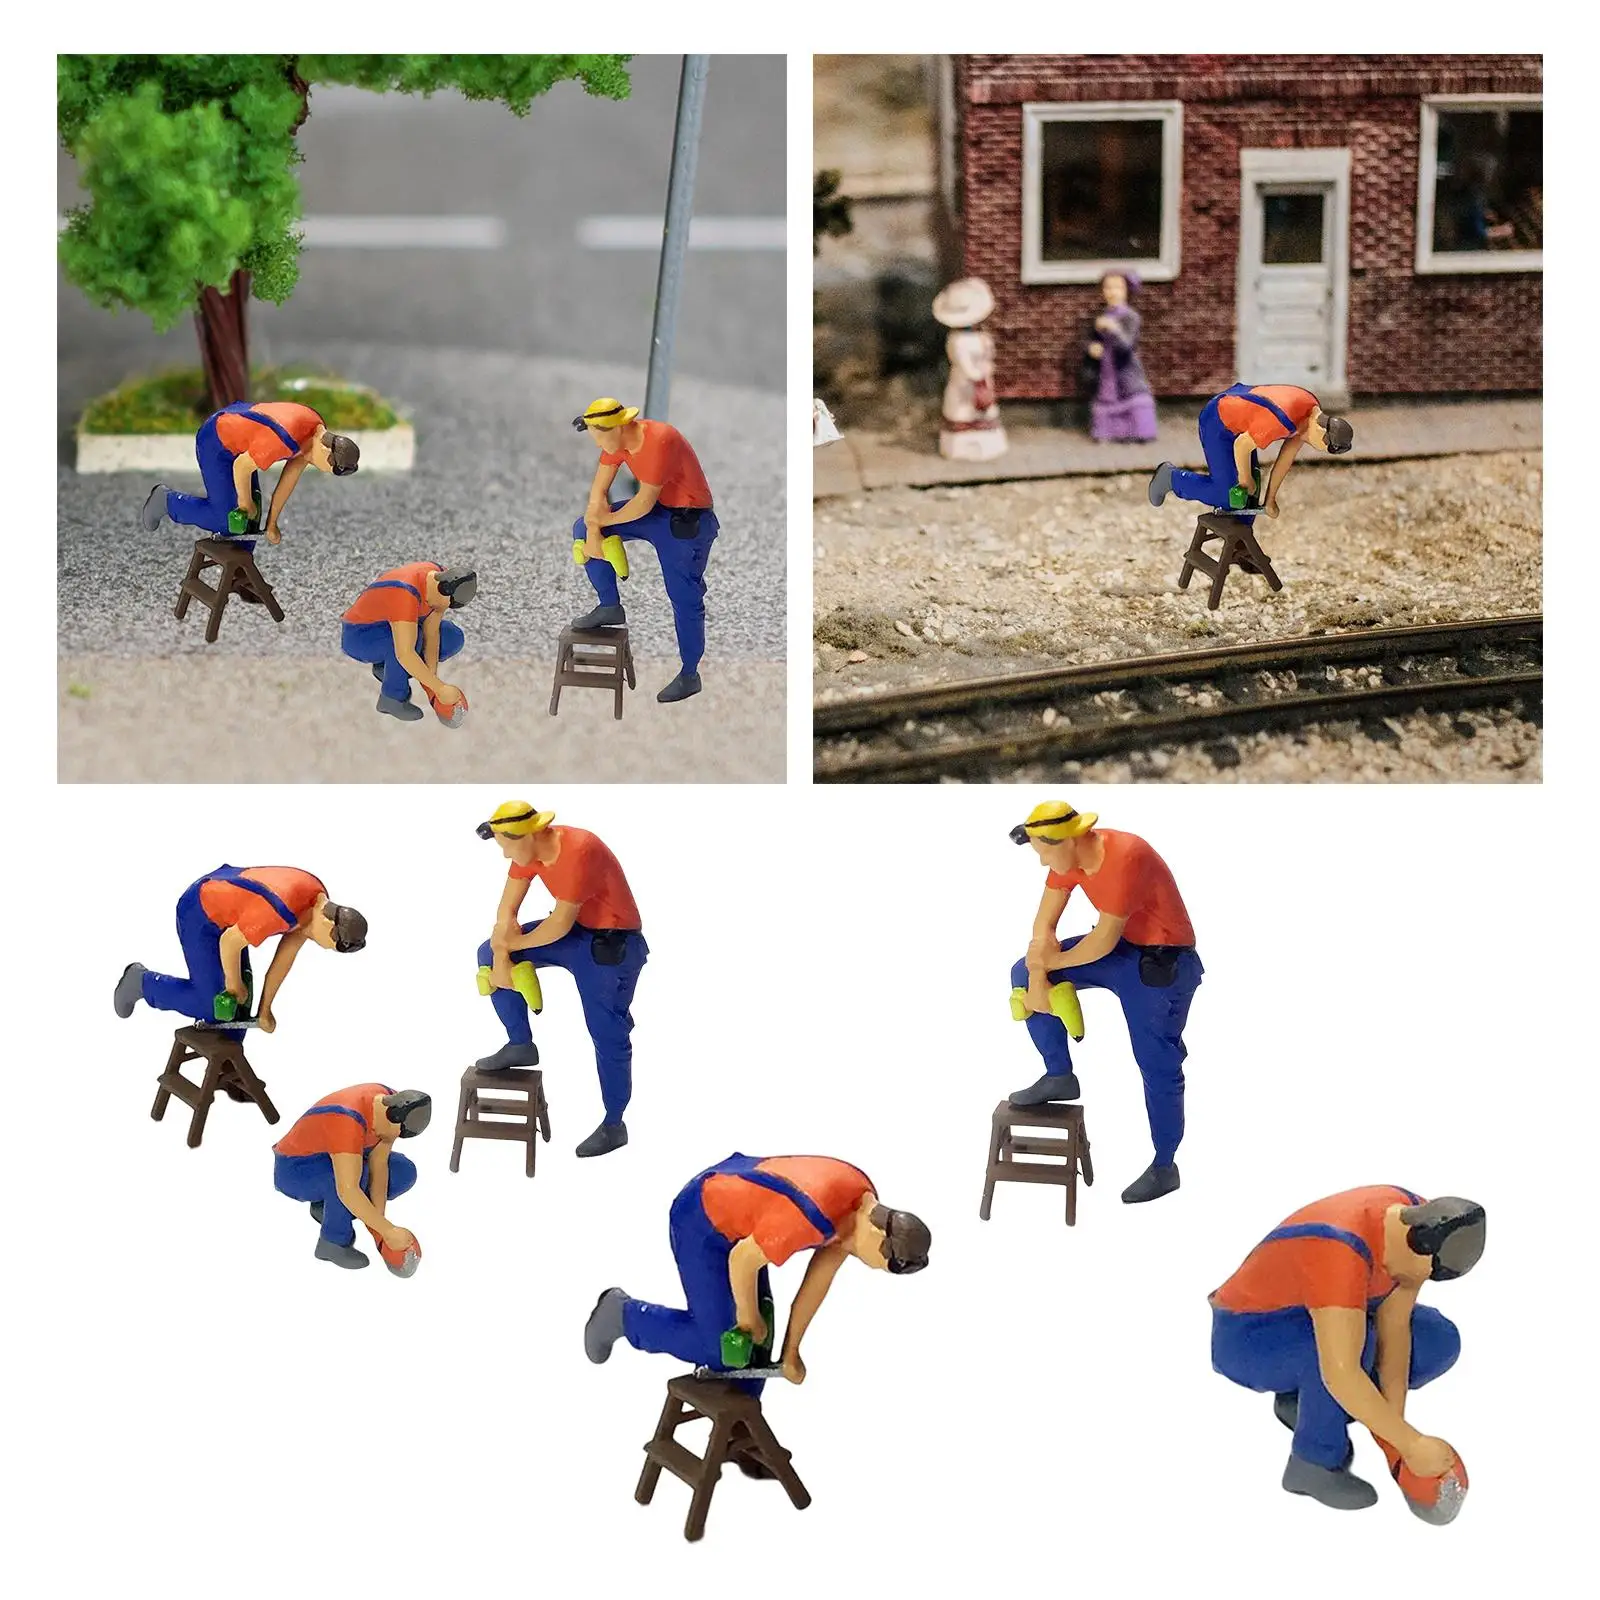 1/64 Figure Repair Worker Miniature Resin Doll Handpainted Accessories Scene DIY Projects Fairy Garden Layout Dioramas S Scale